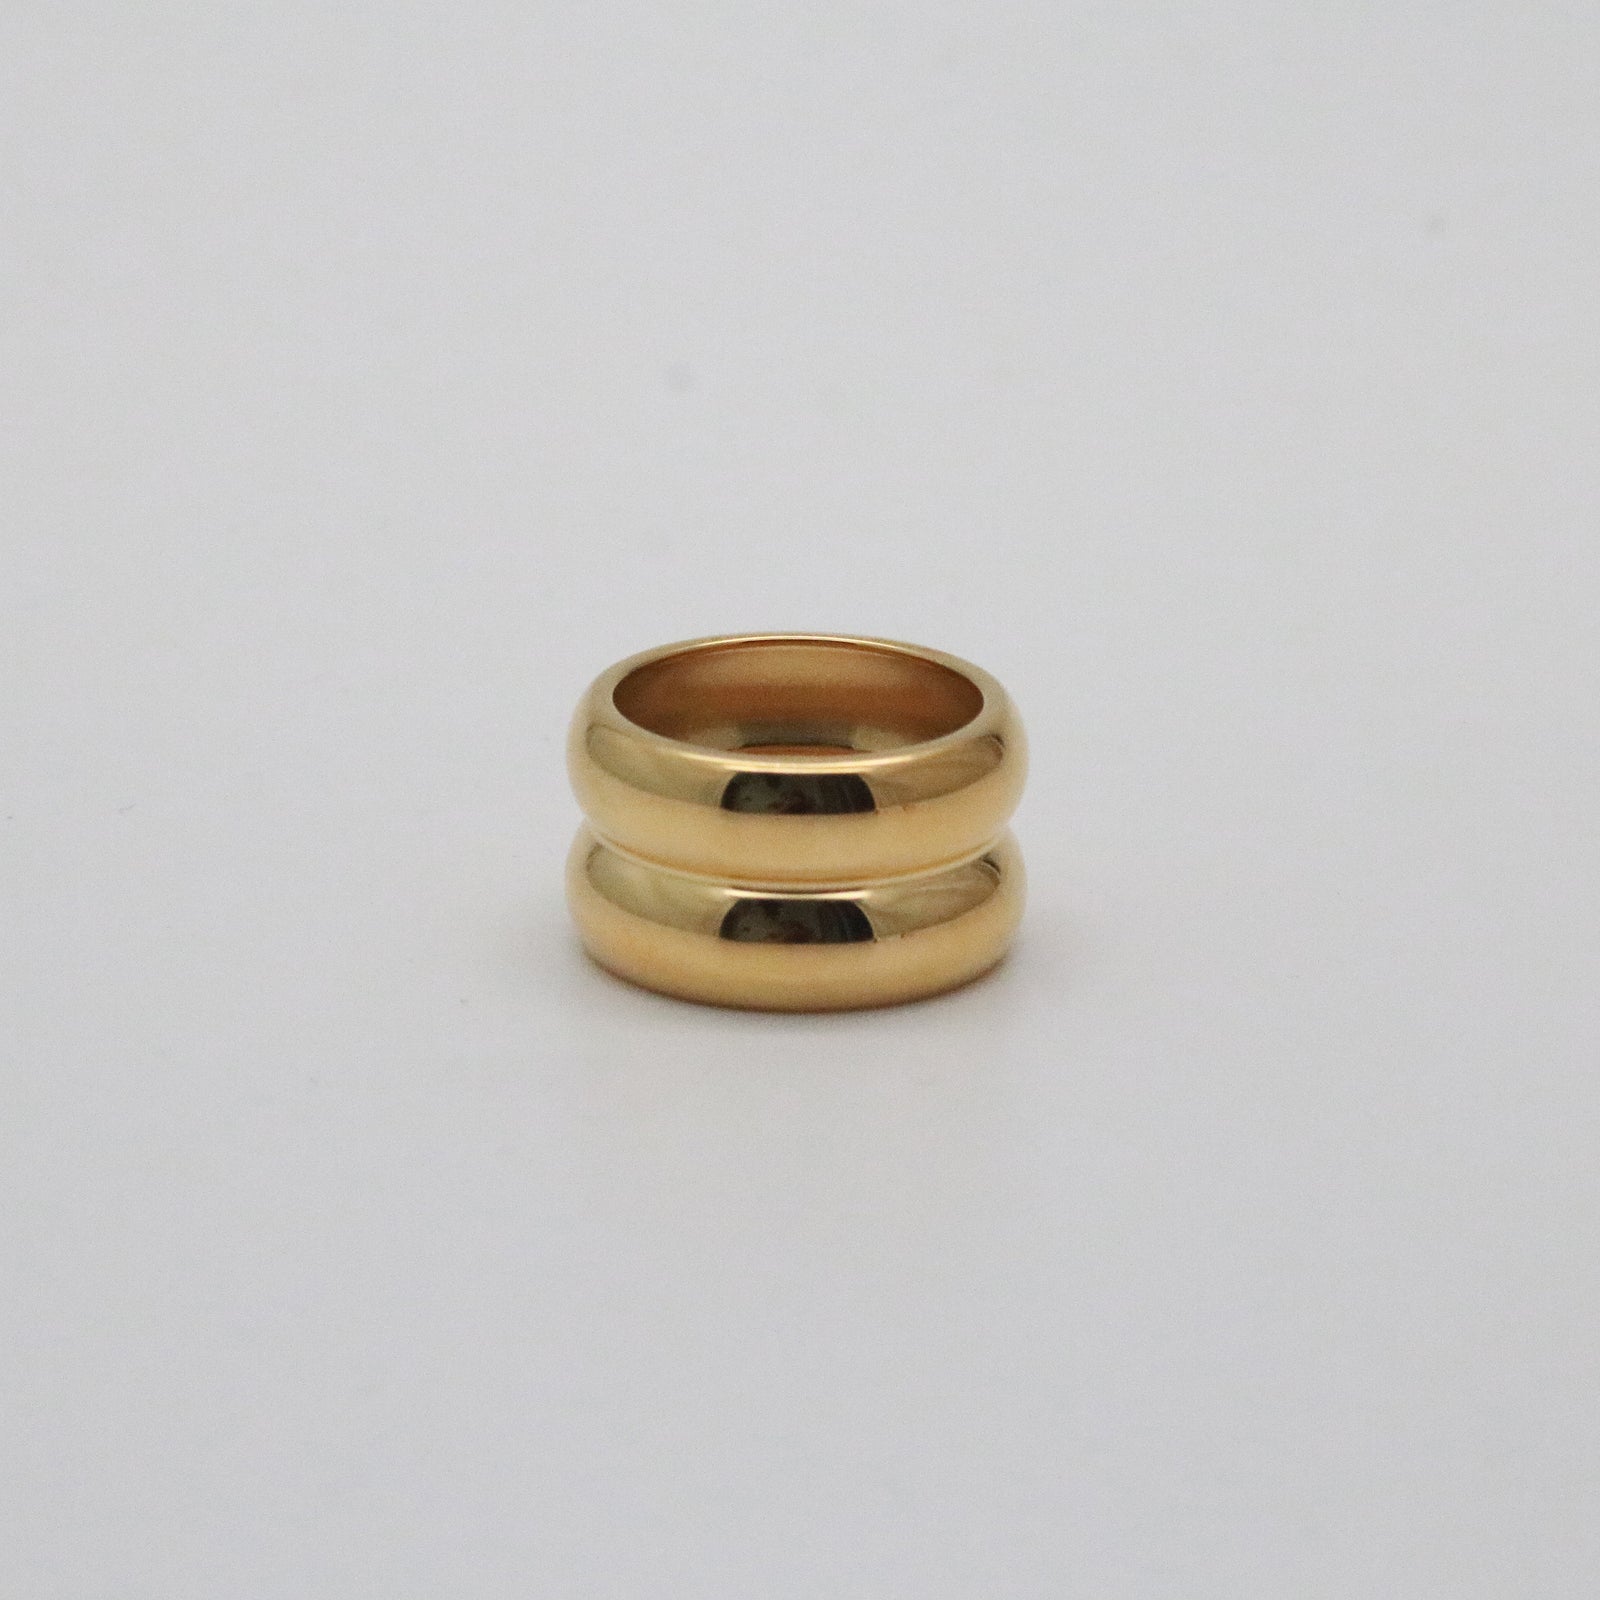 Asher Ring in 18k gold plated stainless steel